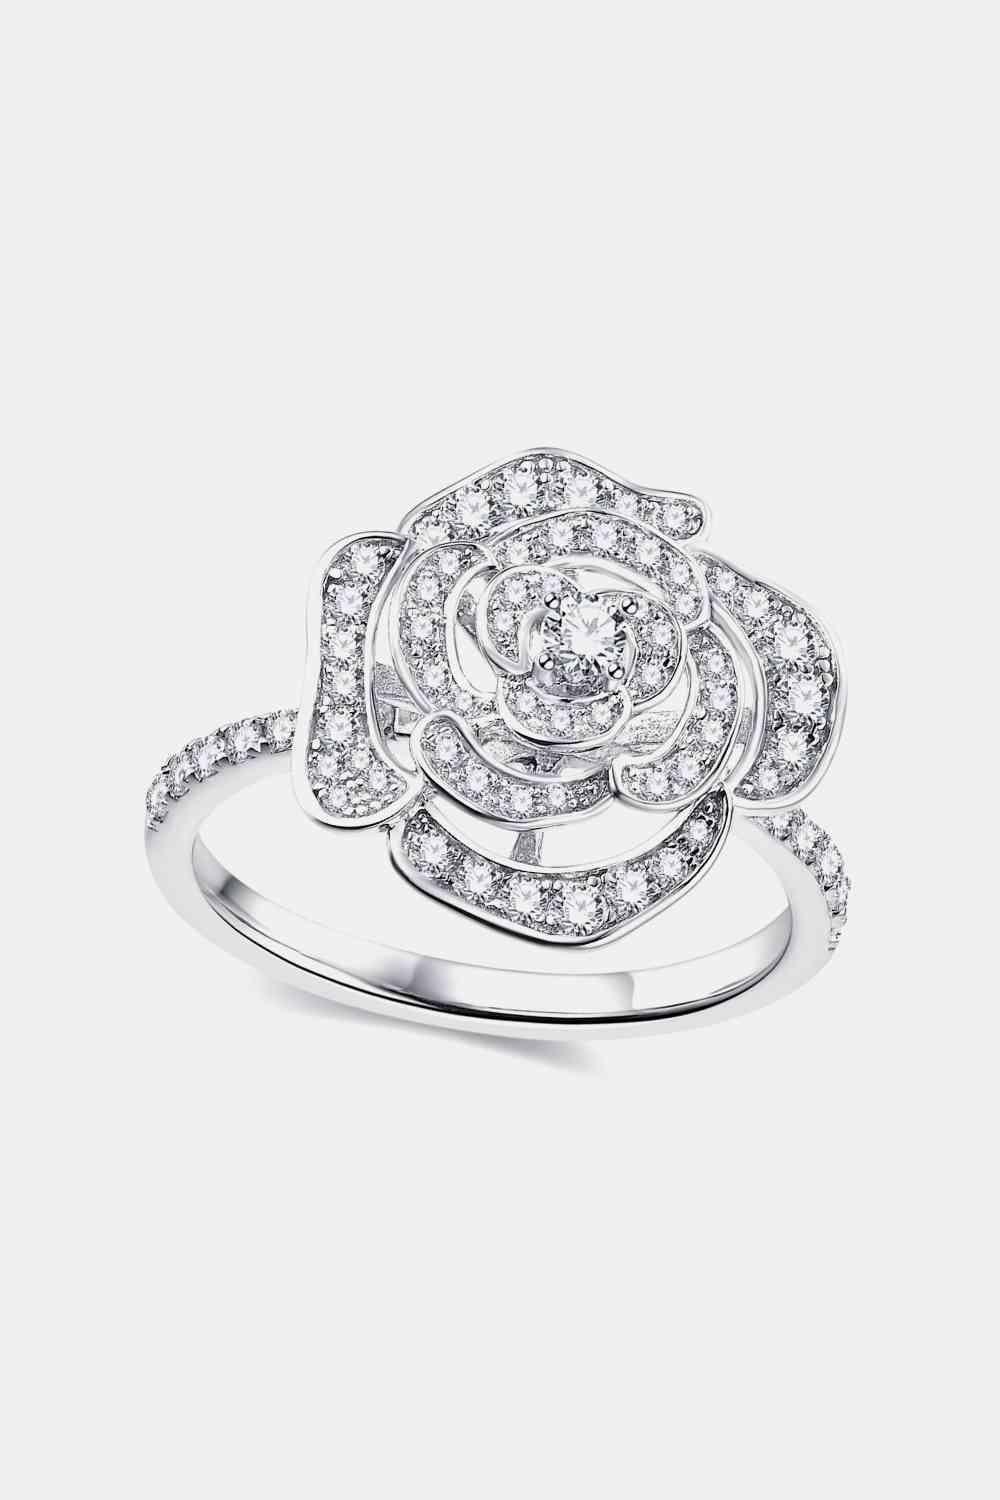 a white gold ring with a flower design